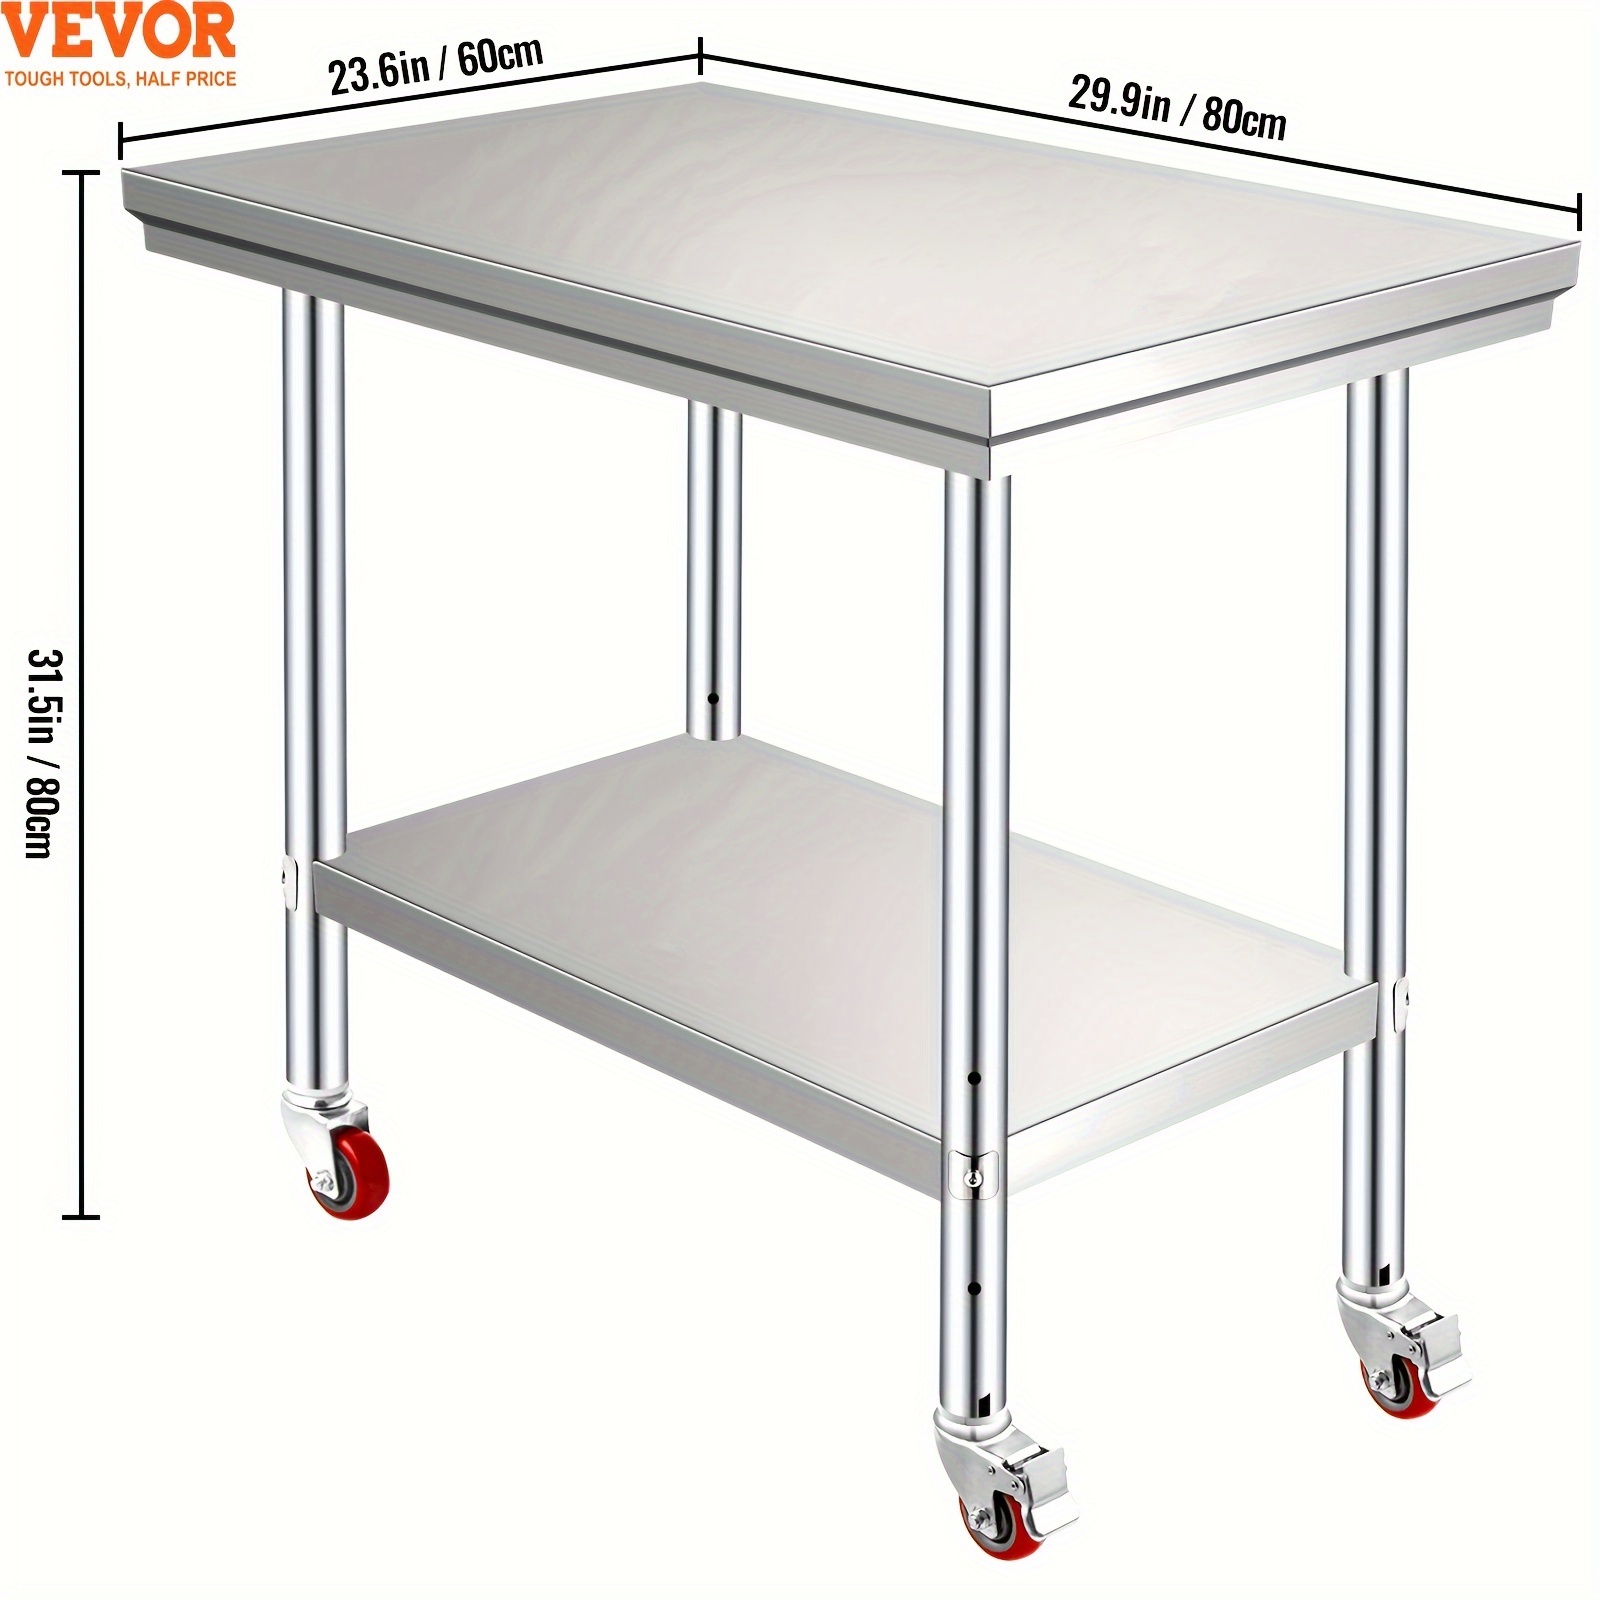 

Mophorn Stainless Steel Work Table With Wheels 24 X 30 X 33.8 Inch Prep Table With 4 Casters Heavy Duty Work Table For Commercial Kitchen Restaurant Business